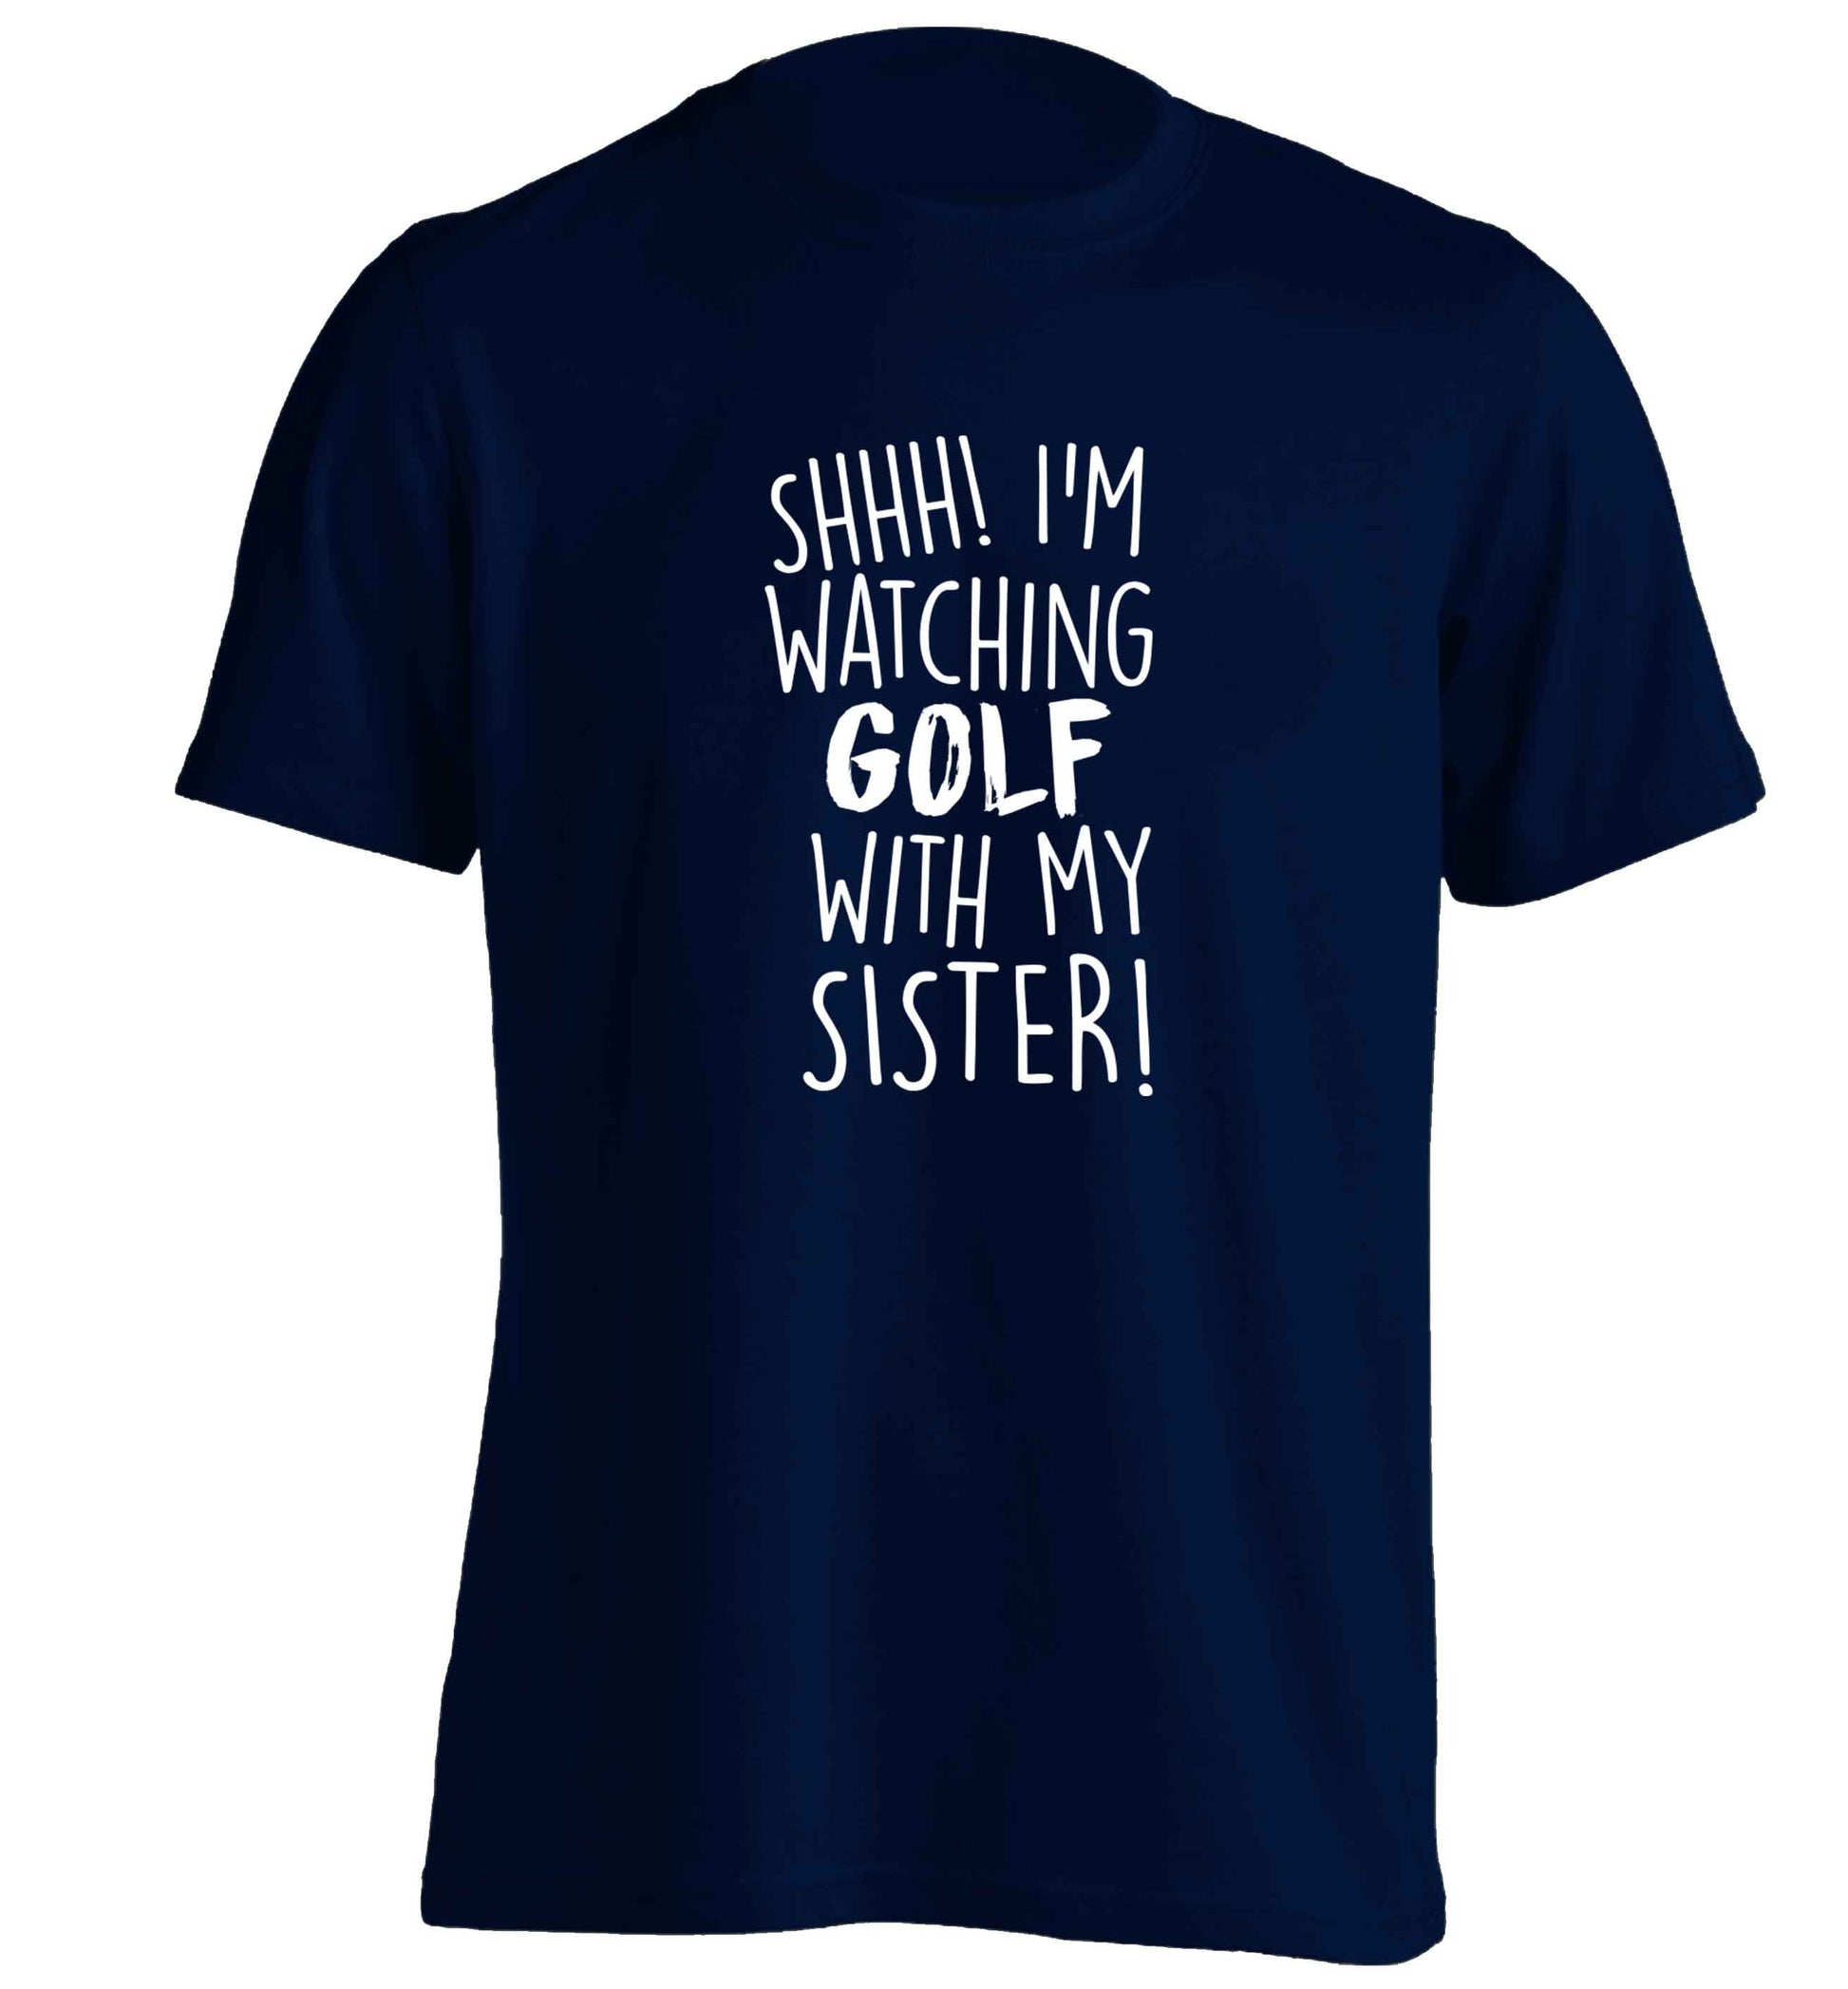 Shh I'm watching golf with my sister adults unisex navy Tshirt 2XL